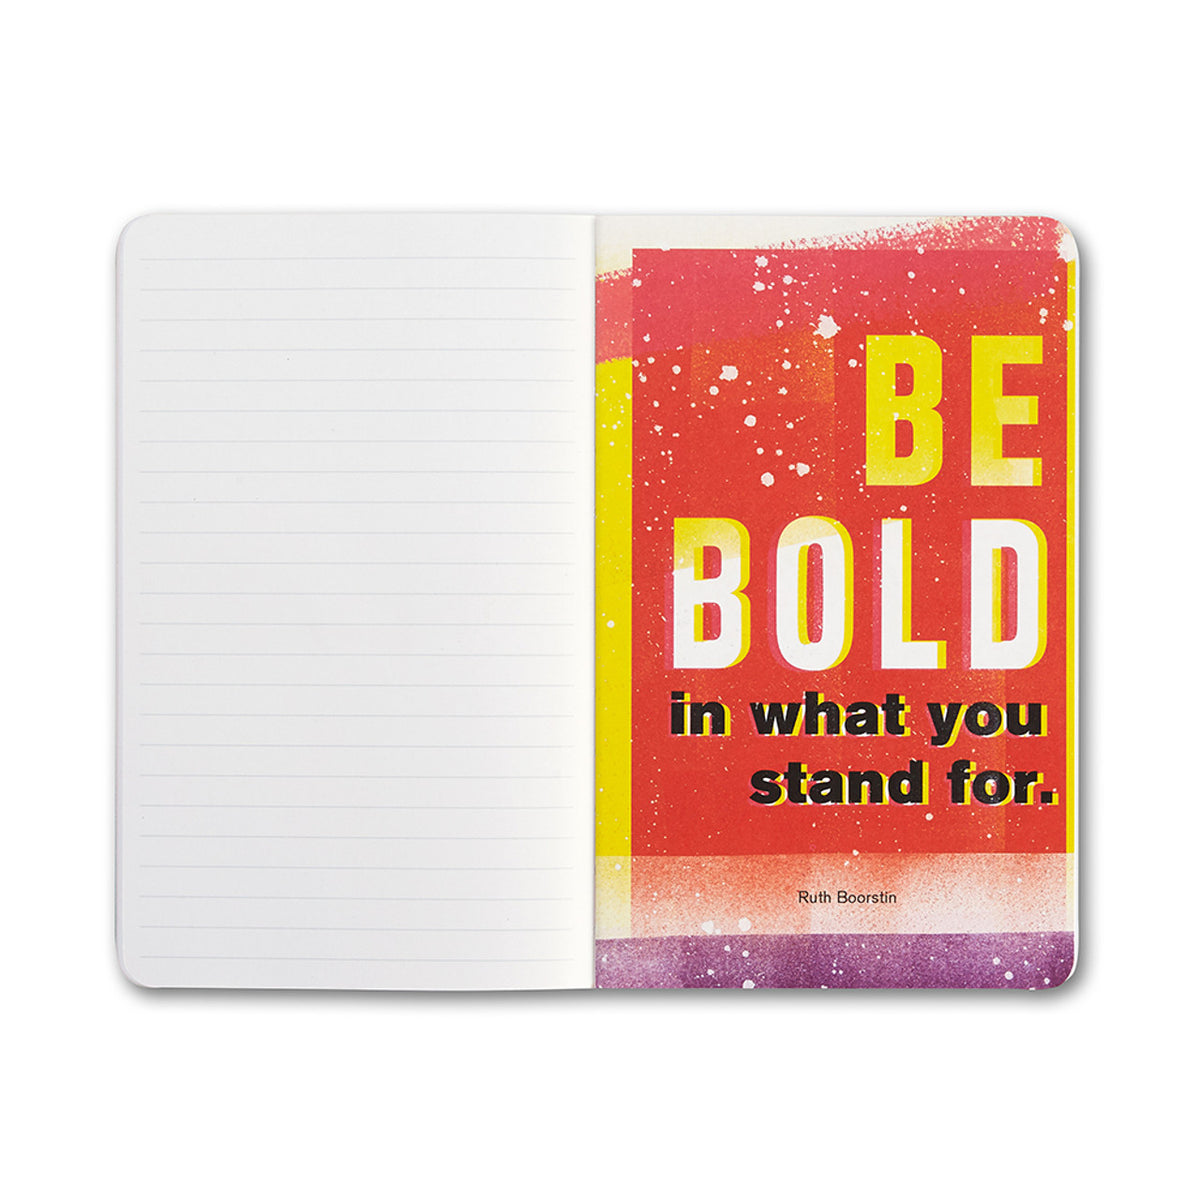 Fearless Write Now Softcover Journal